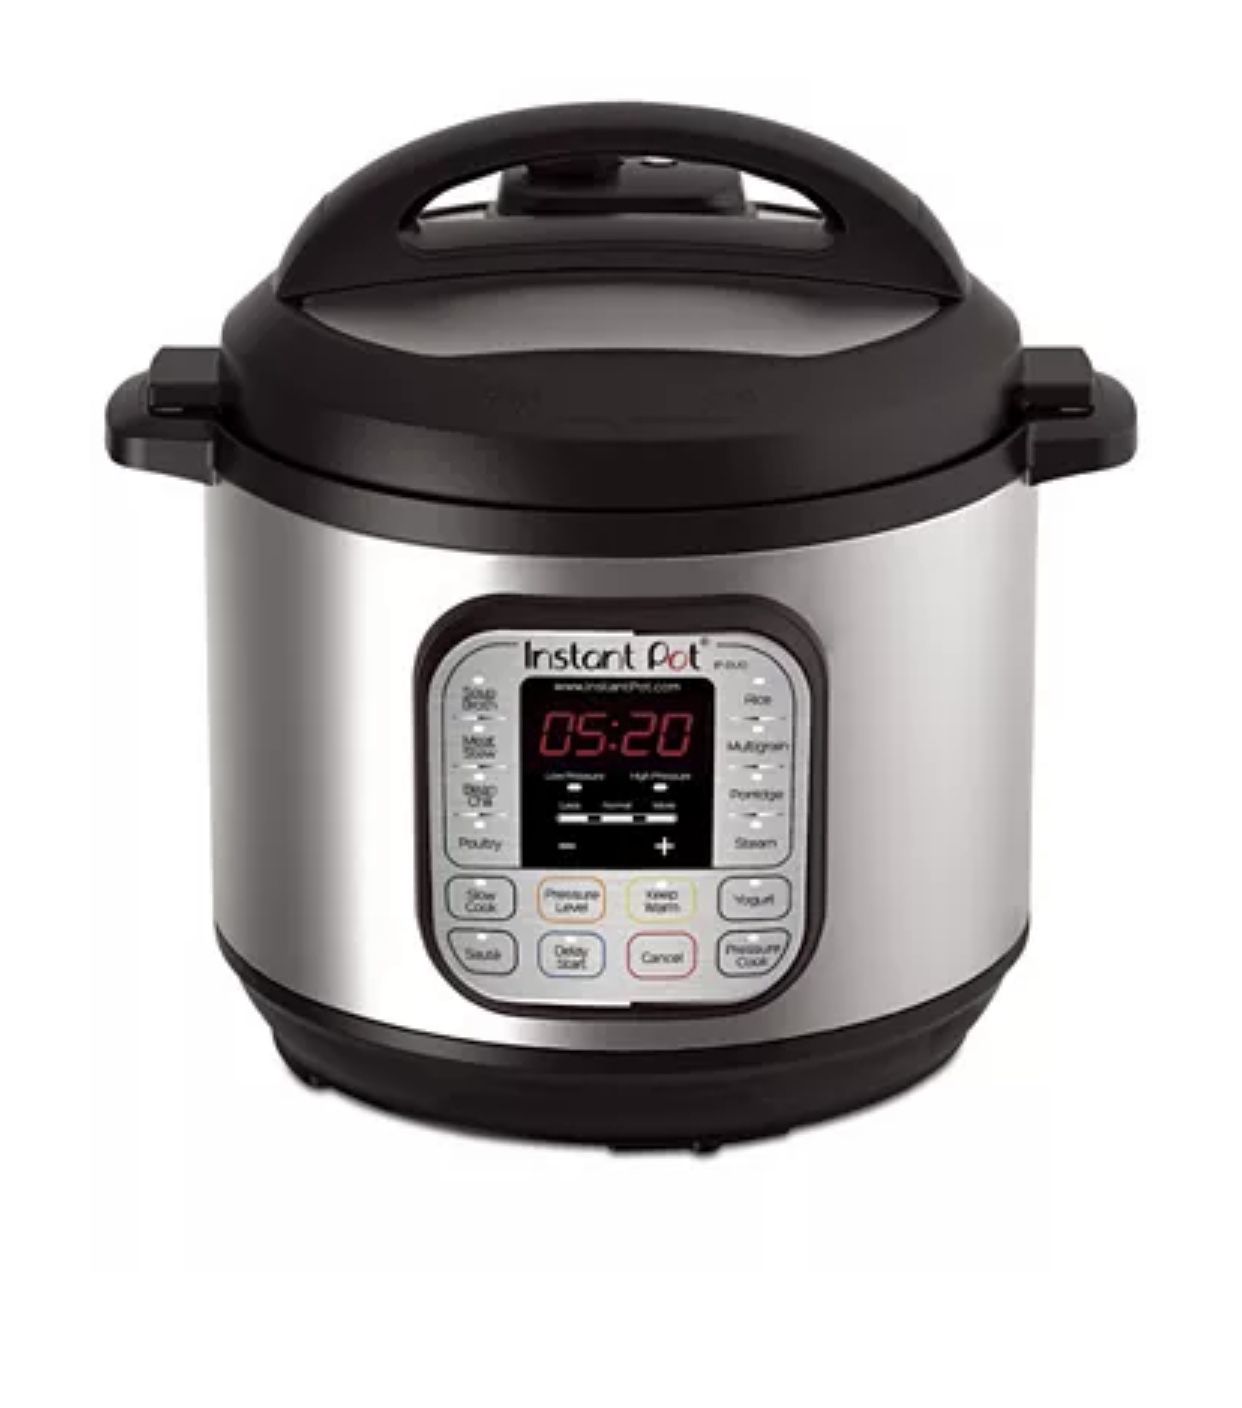 Brand New Instant Pot, Pressure cooker all in one